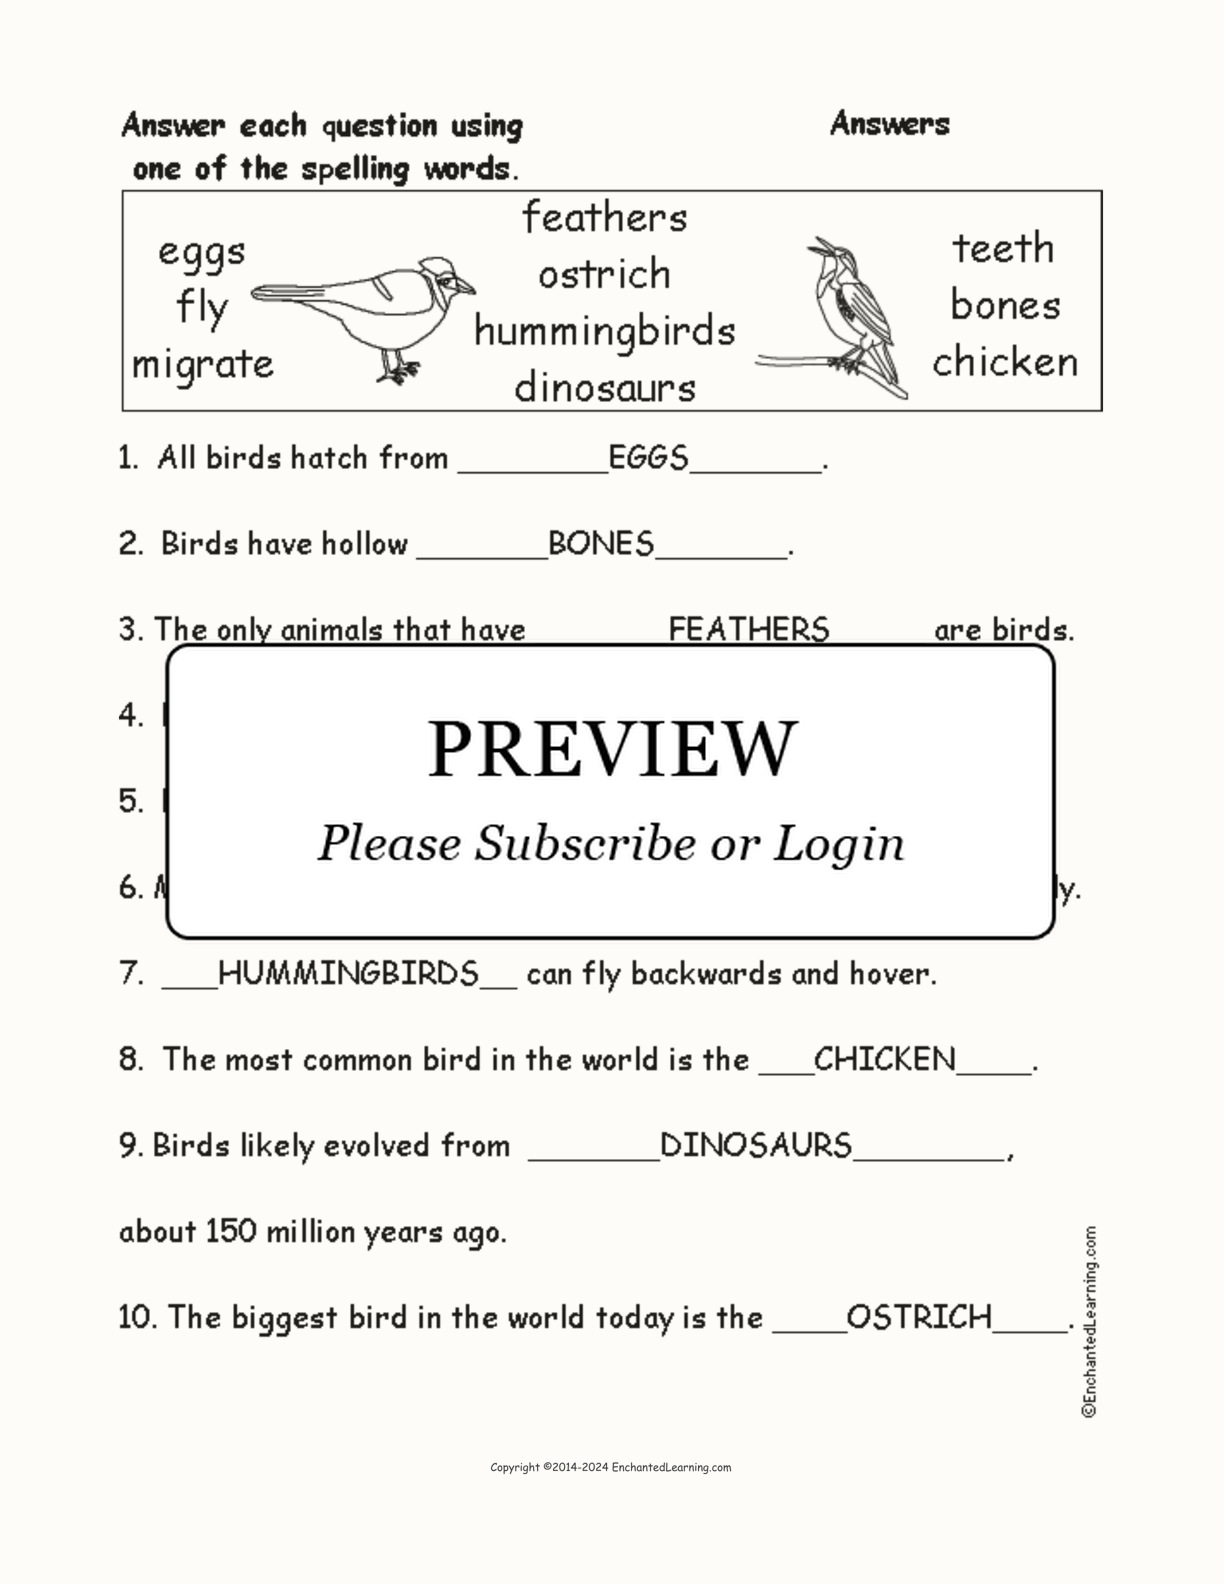 Bird Spelling Word Questions interactive worksheet page 2